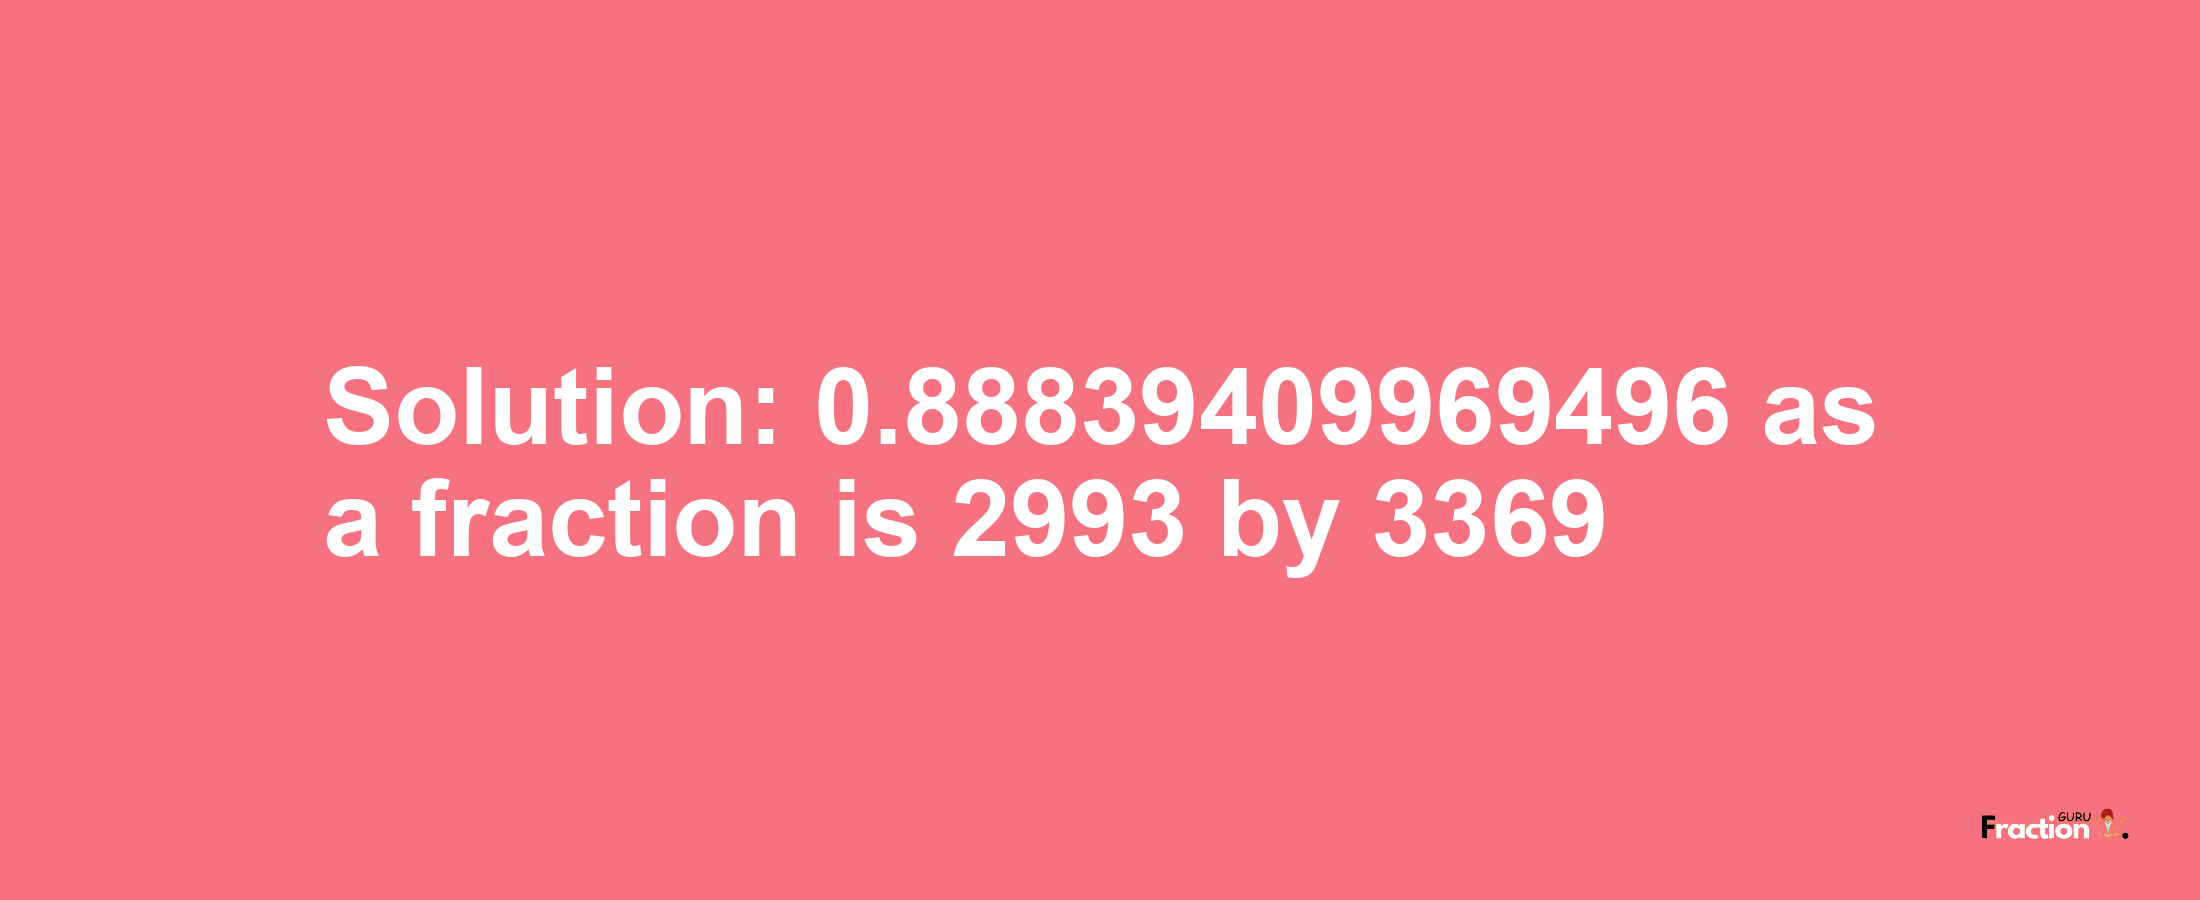 Solution:0.88839409969496 as a fraction is 2993/3369